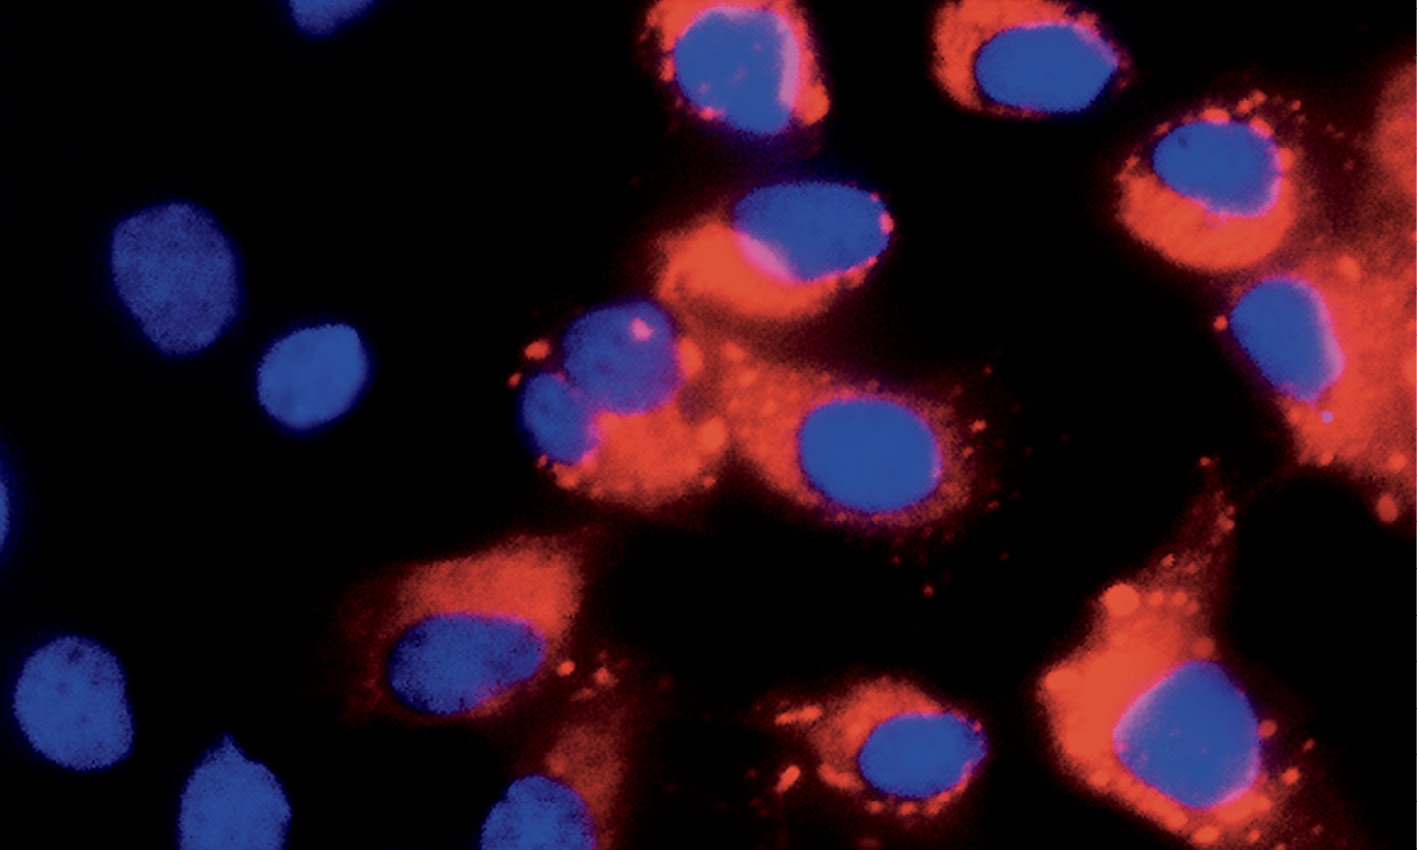 Stem cells lacking protective genes are vulnerable to attack by viruses such as dengue (red).